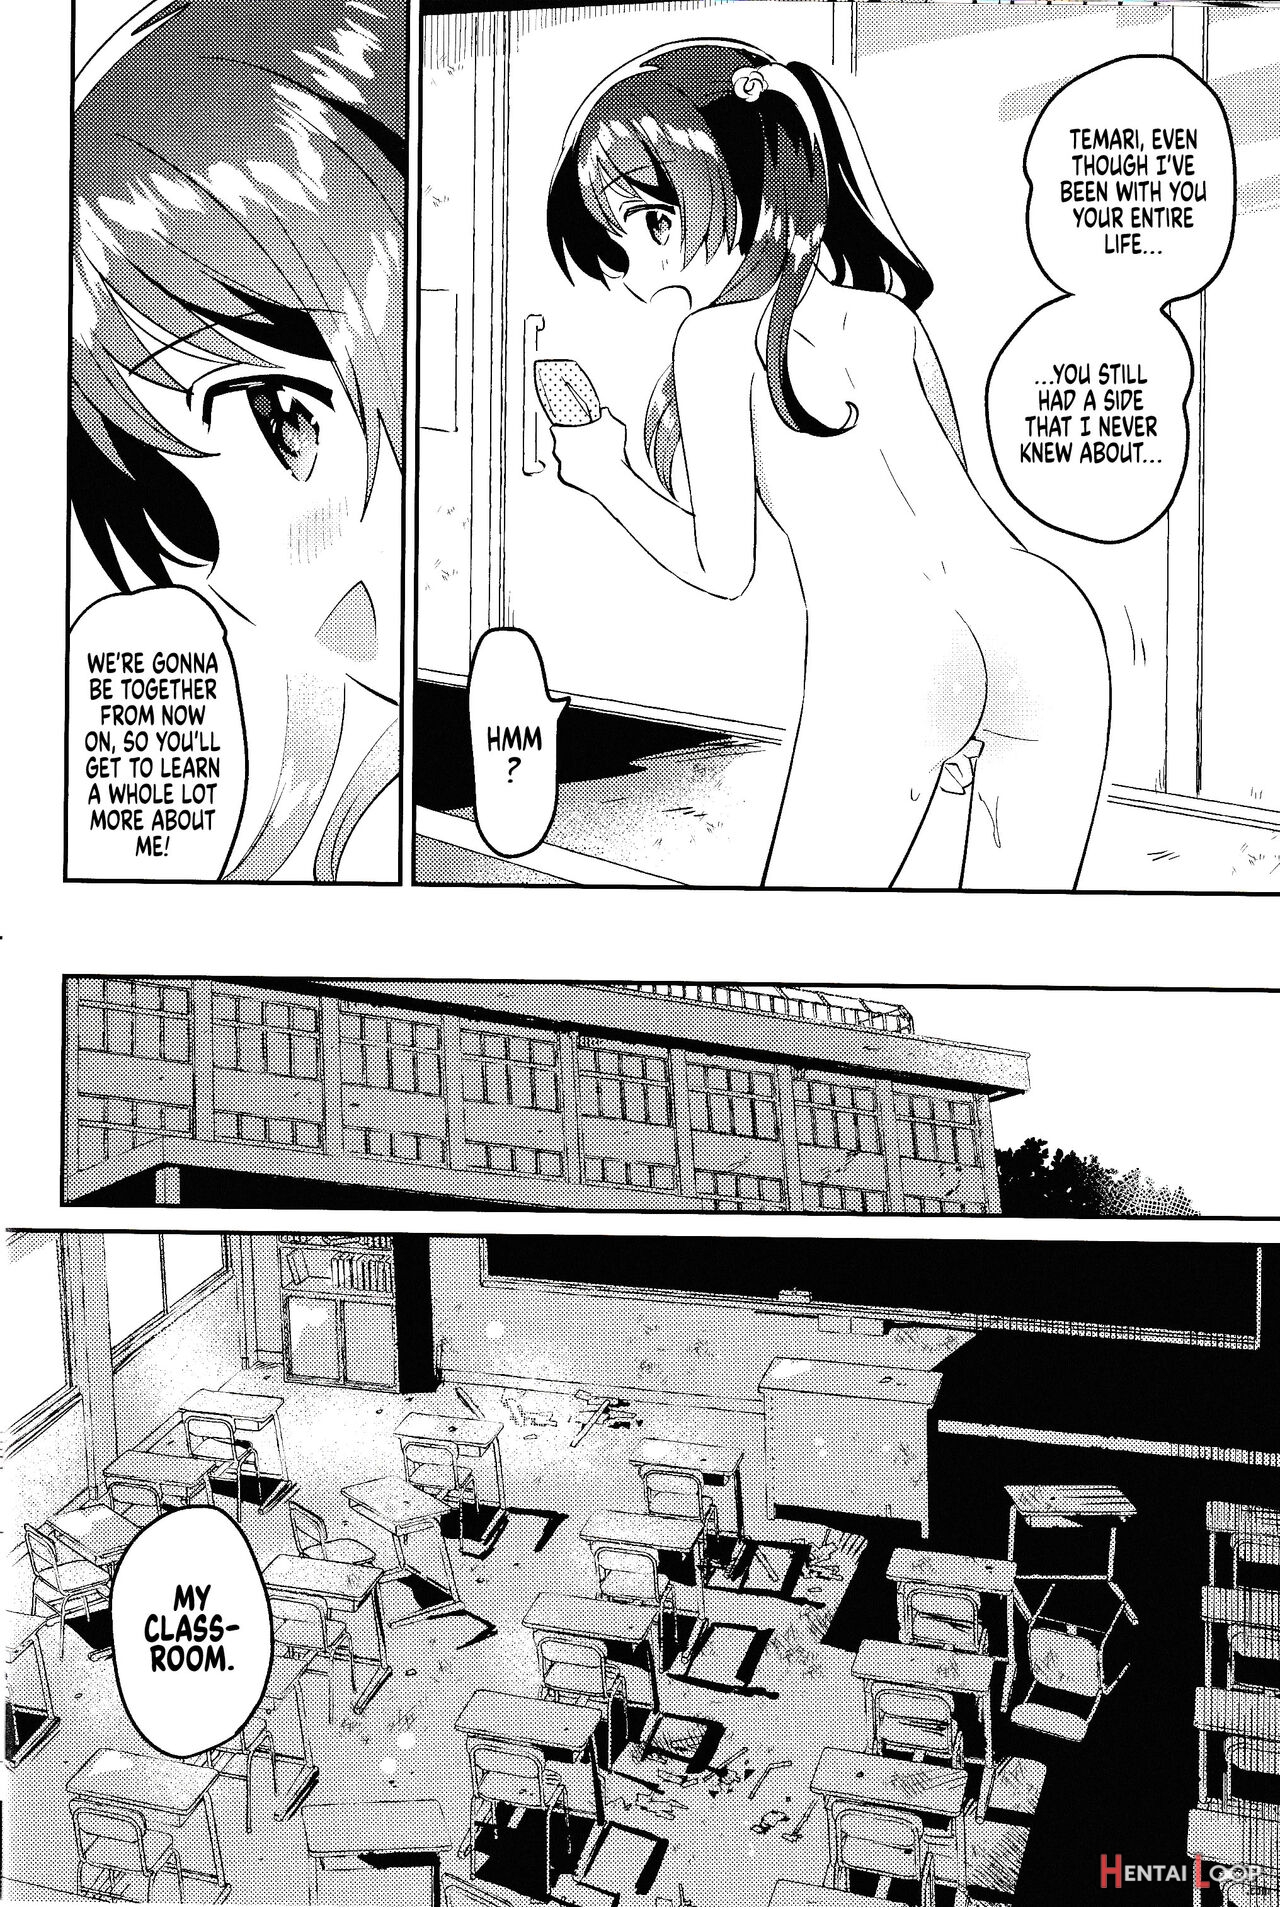 Imouto To Lockdown √heaven page 11